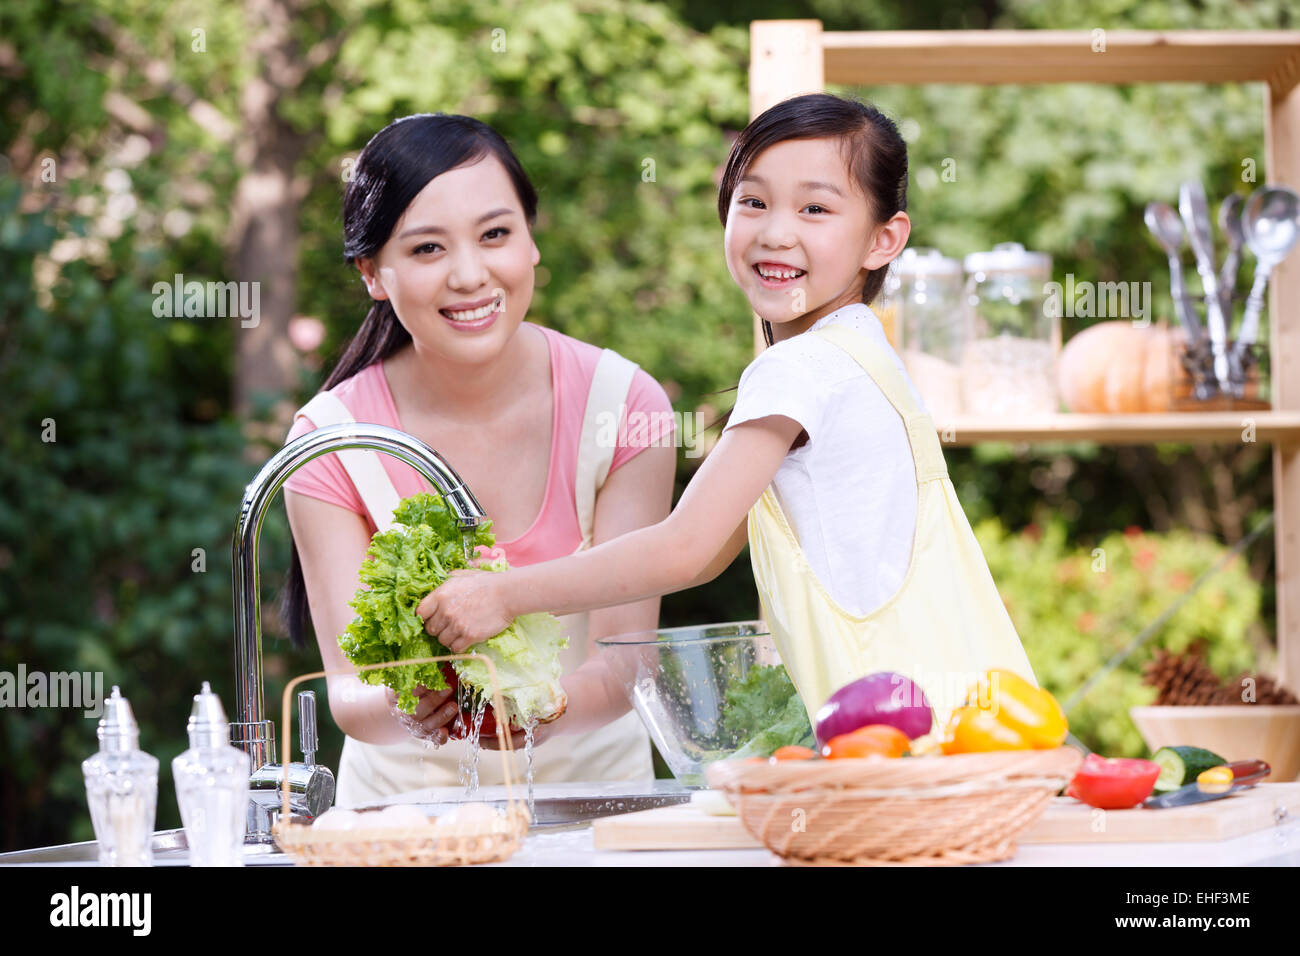 Mother and daughter in the outdoor kitchen cleaning vegetables Stock Photo